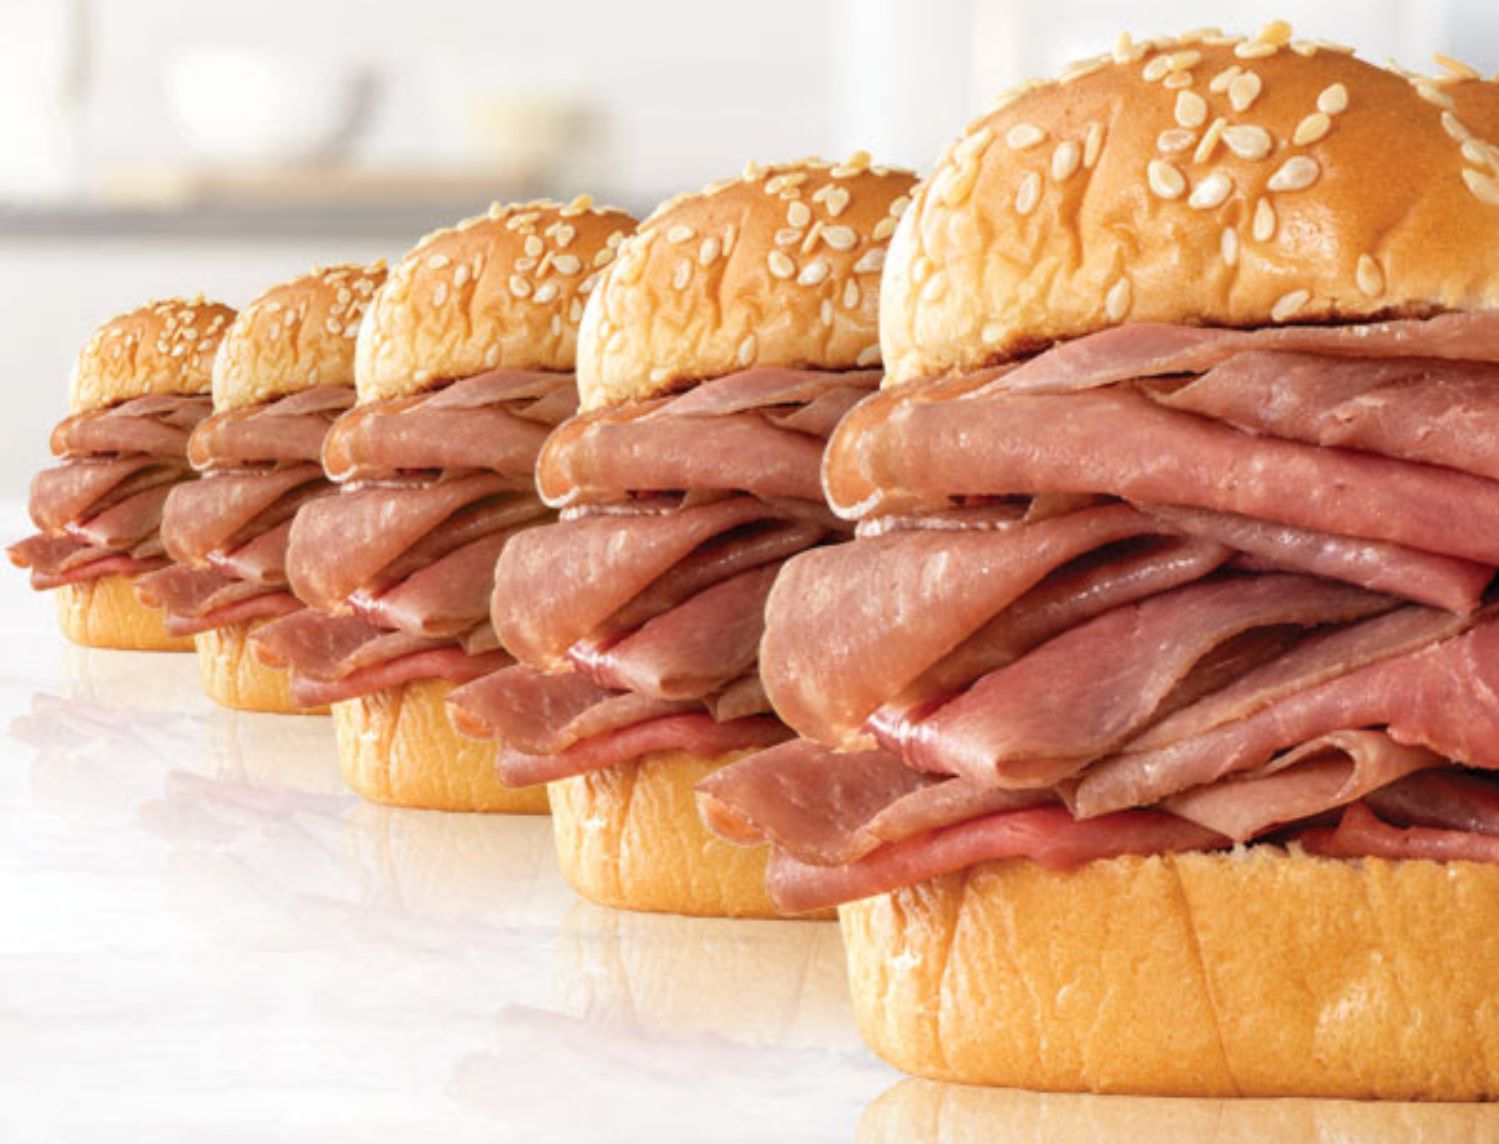 Get 5 Classic Roast Beef Sandwiches for Only $10 from Arby's